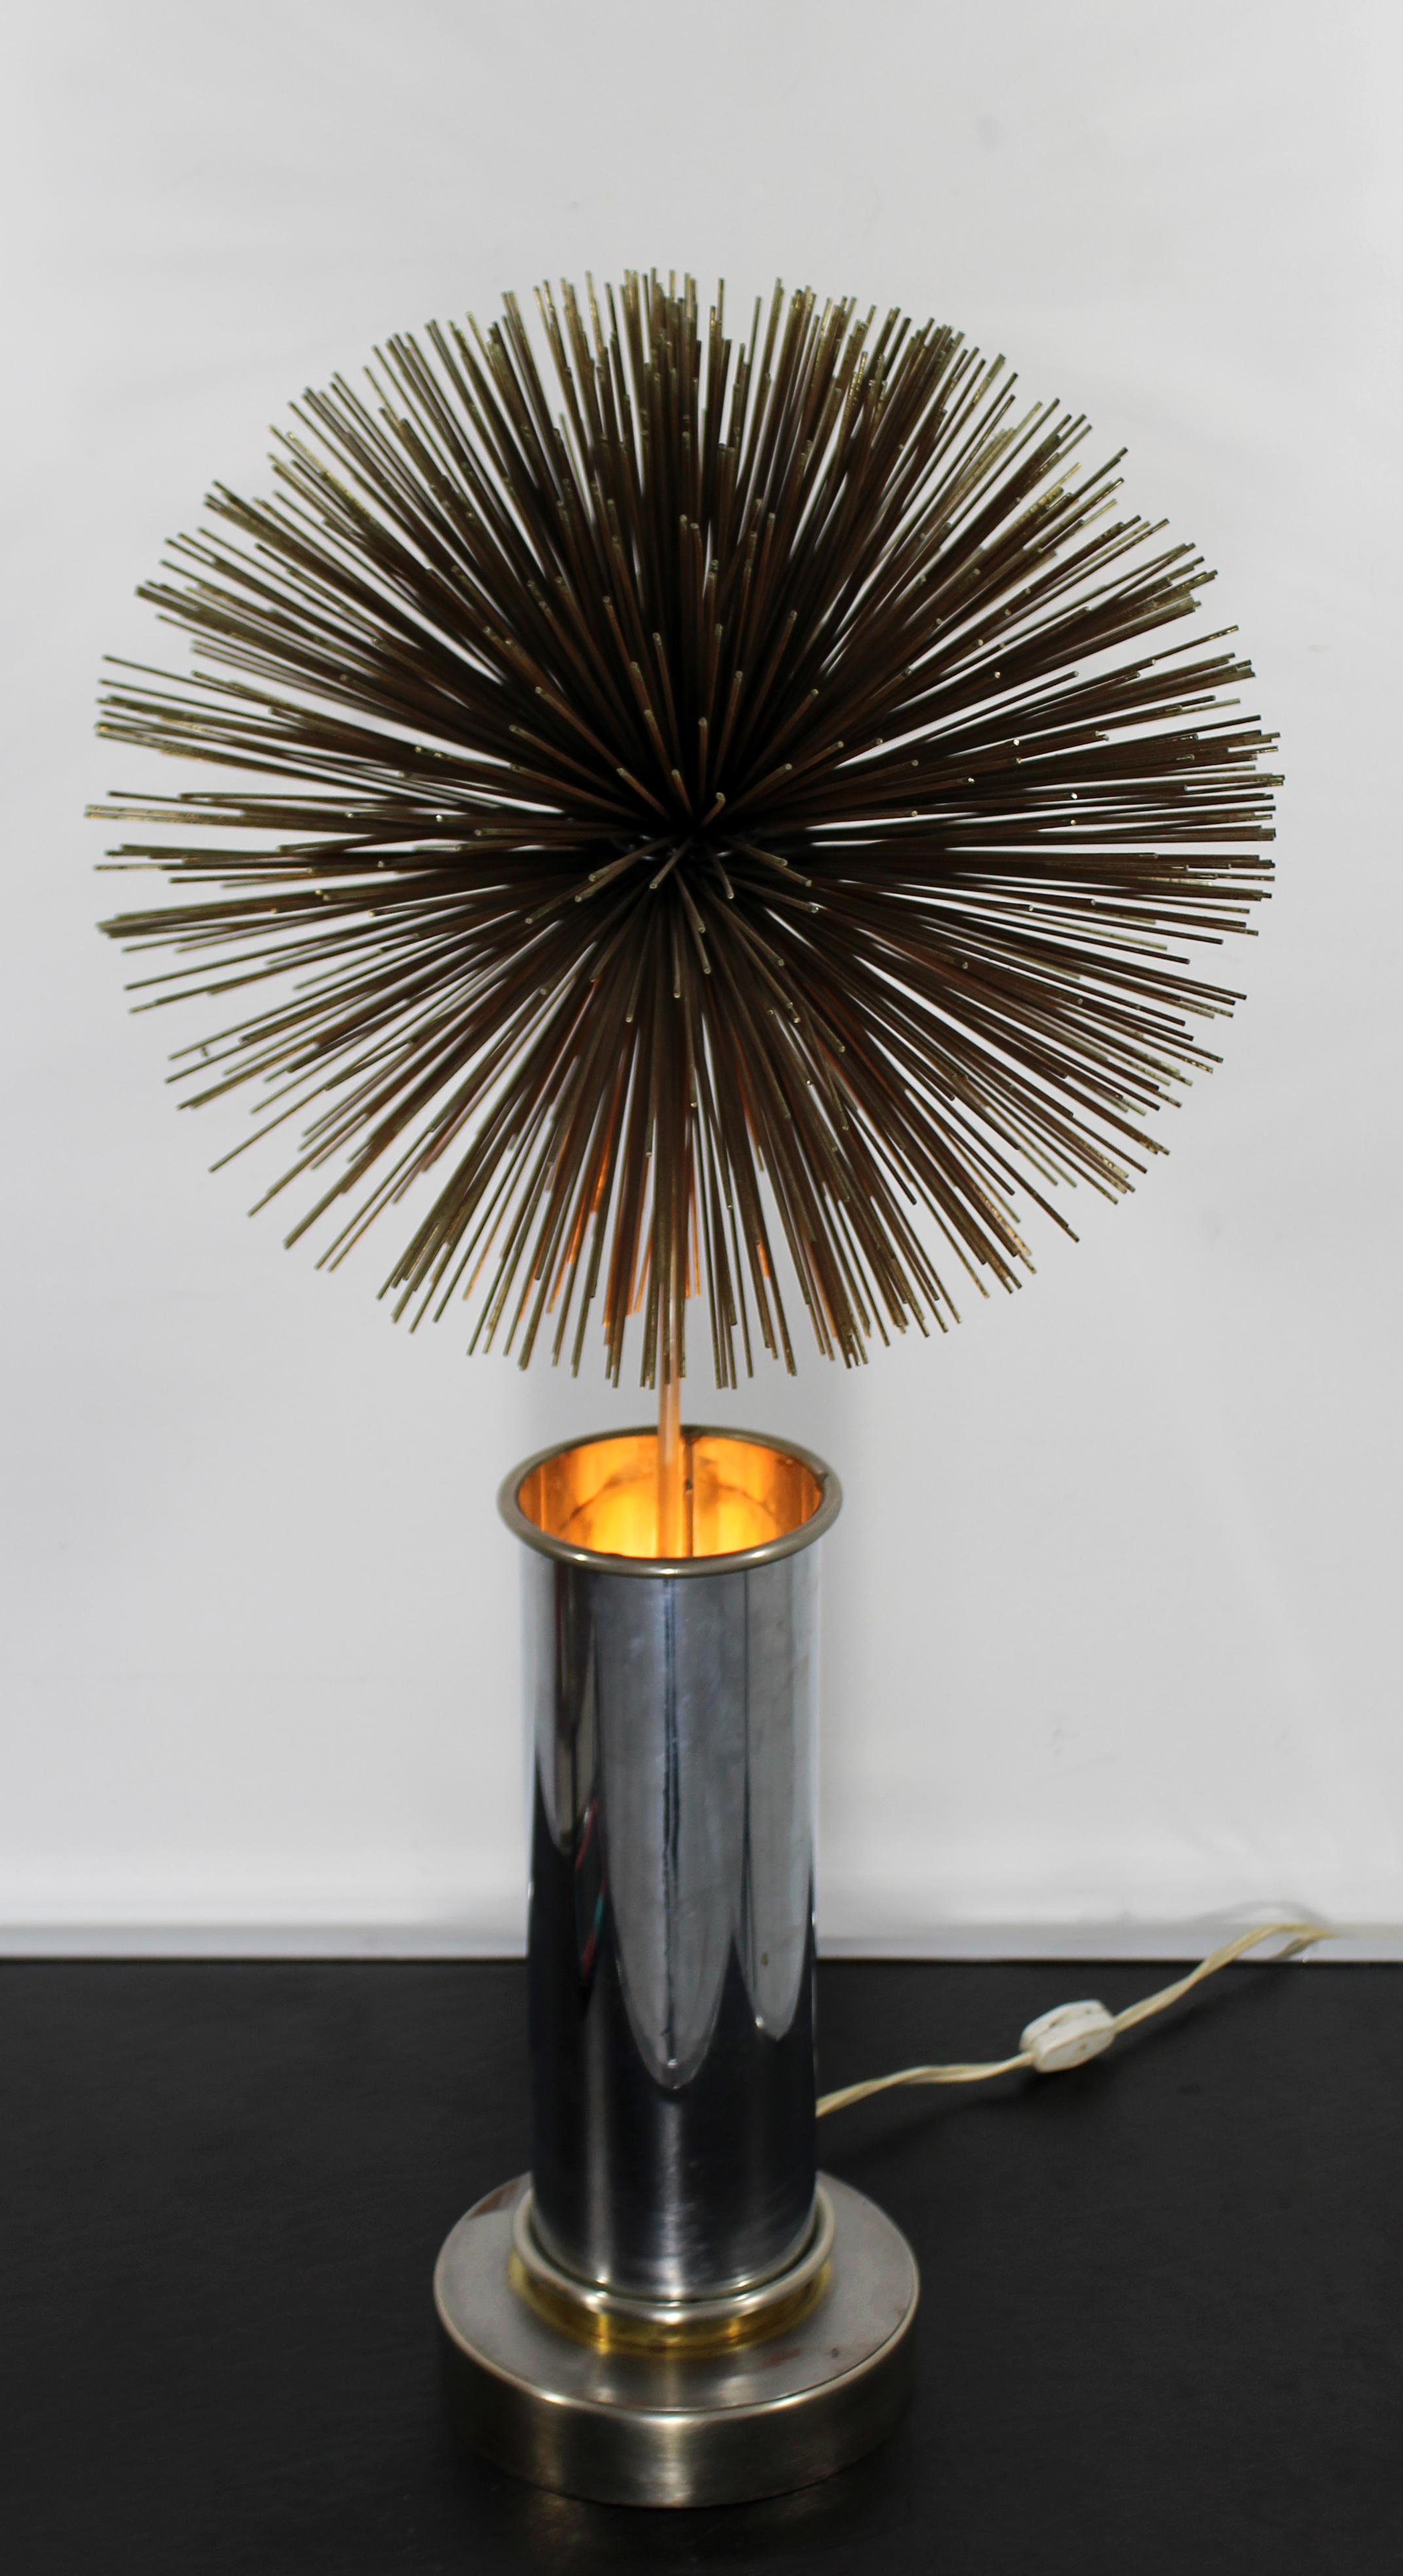 For your consideration is an understated, spiky pom pom table lamp, in mixed metals, by Curtis Jere, circa the 1960s. In excellent condition. The dimensions are 12